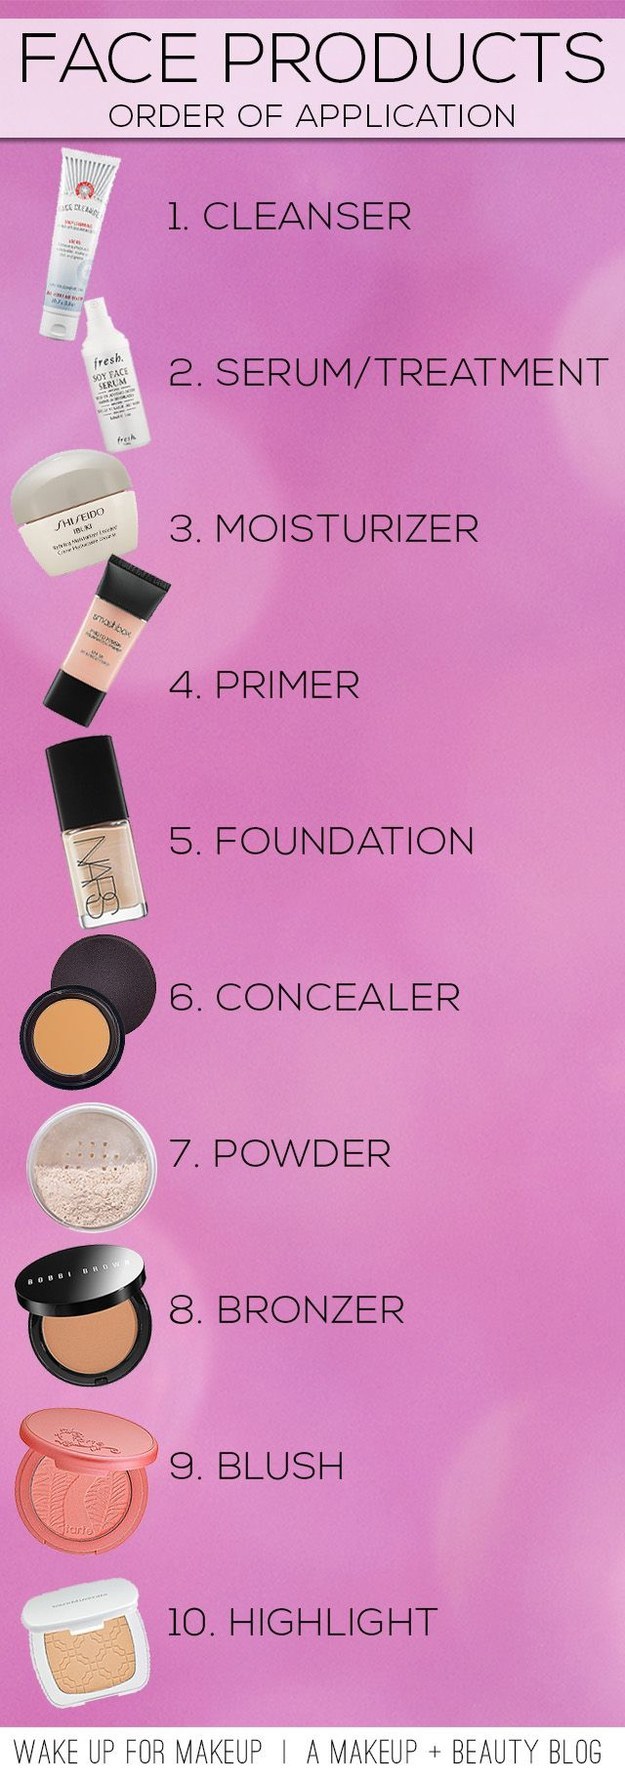 Proper Order to Apply Face Products